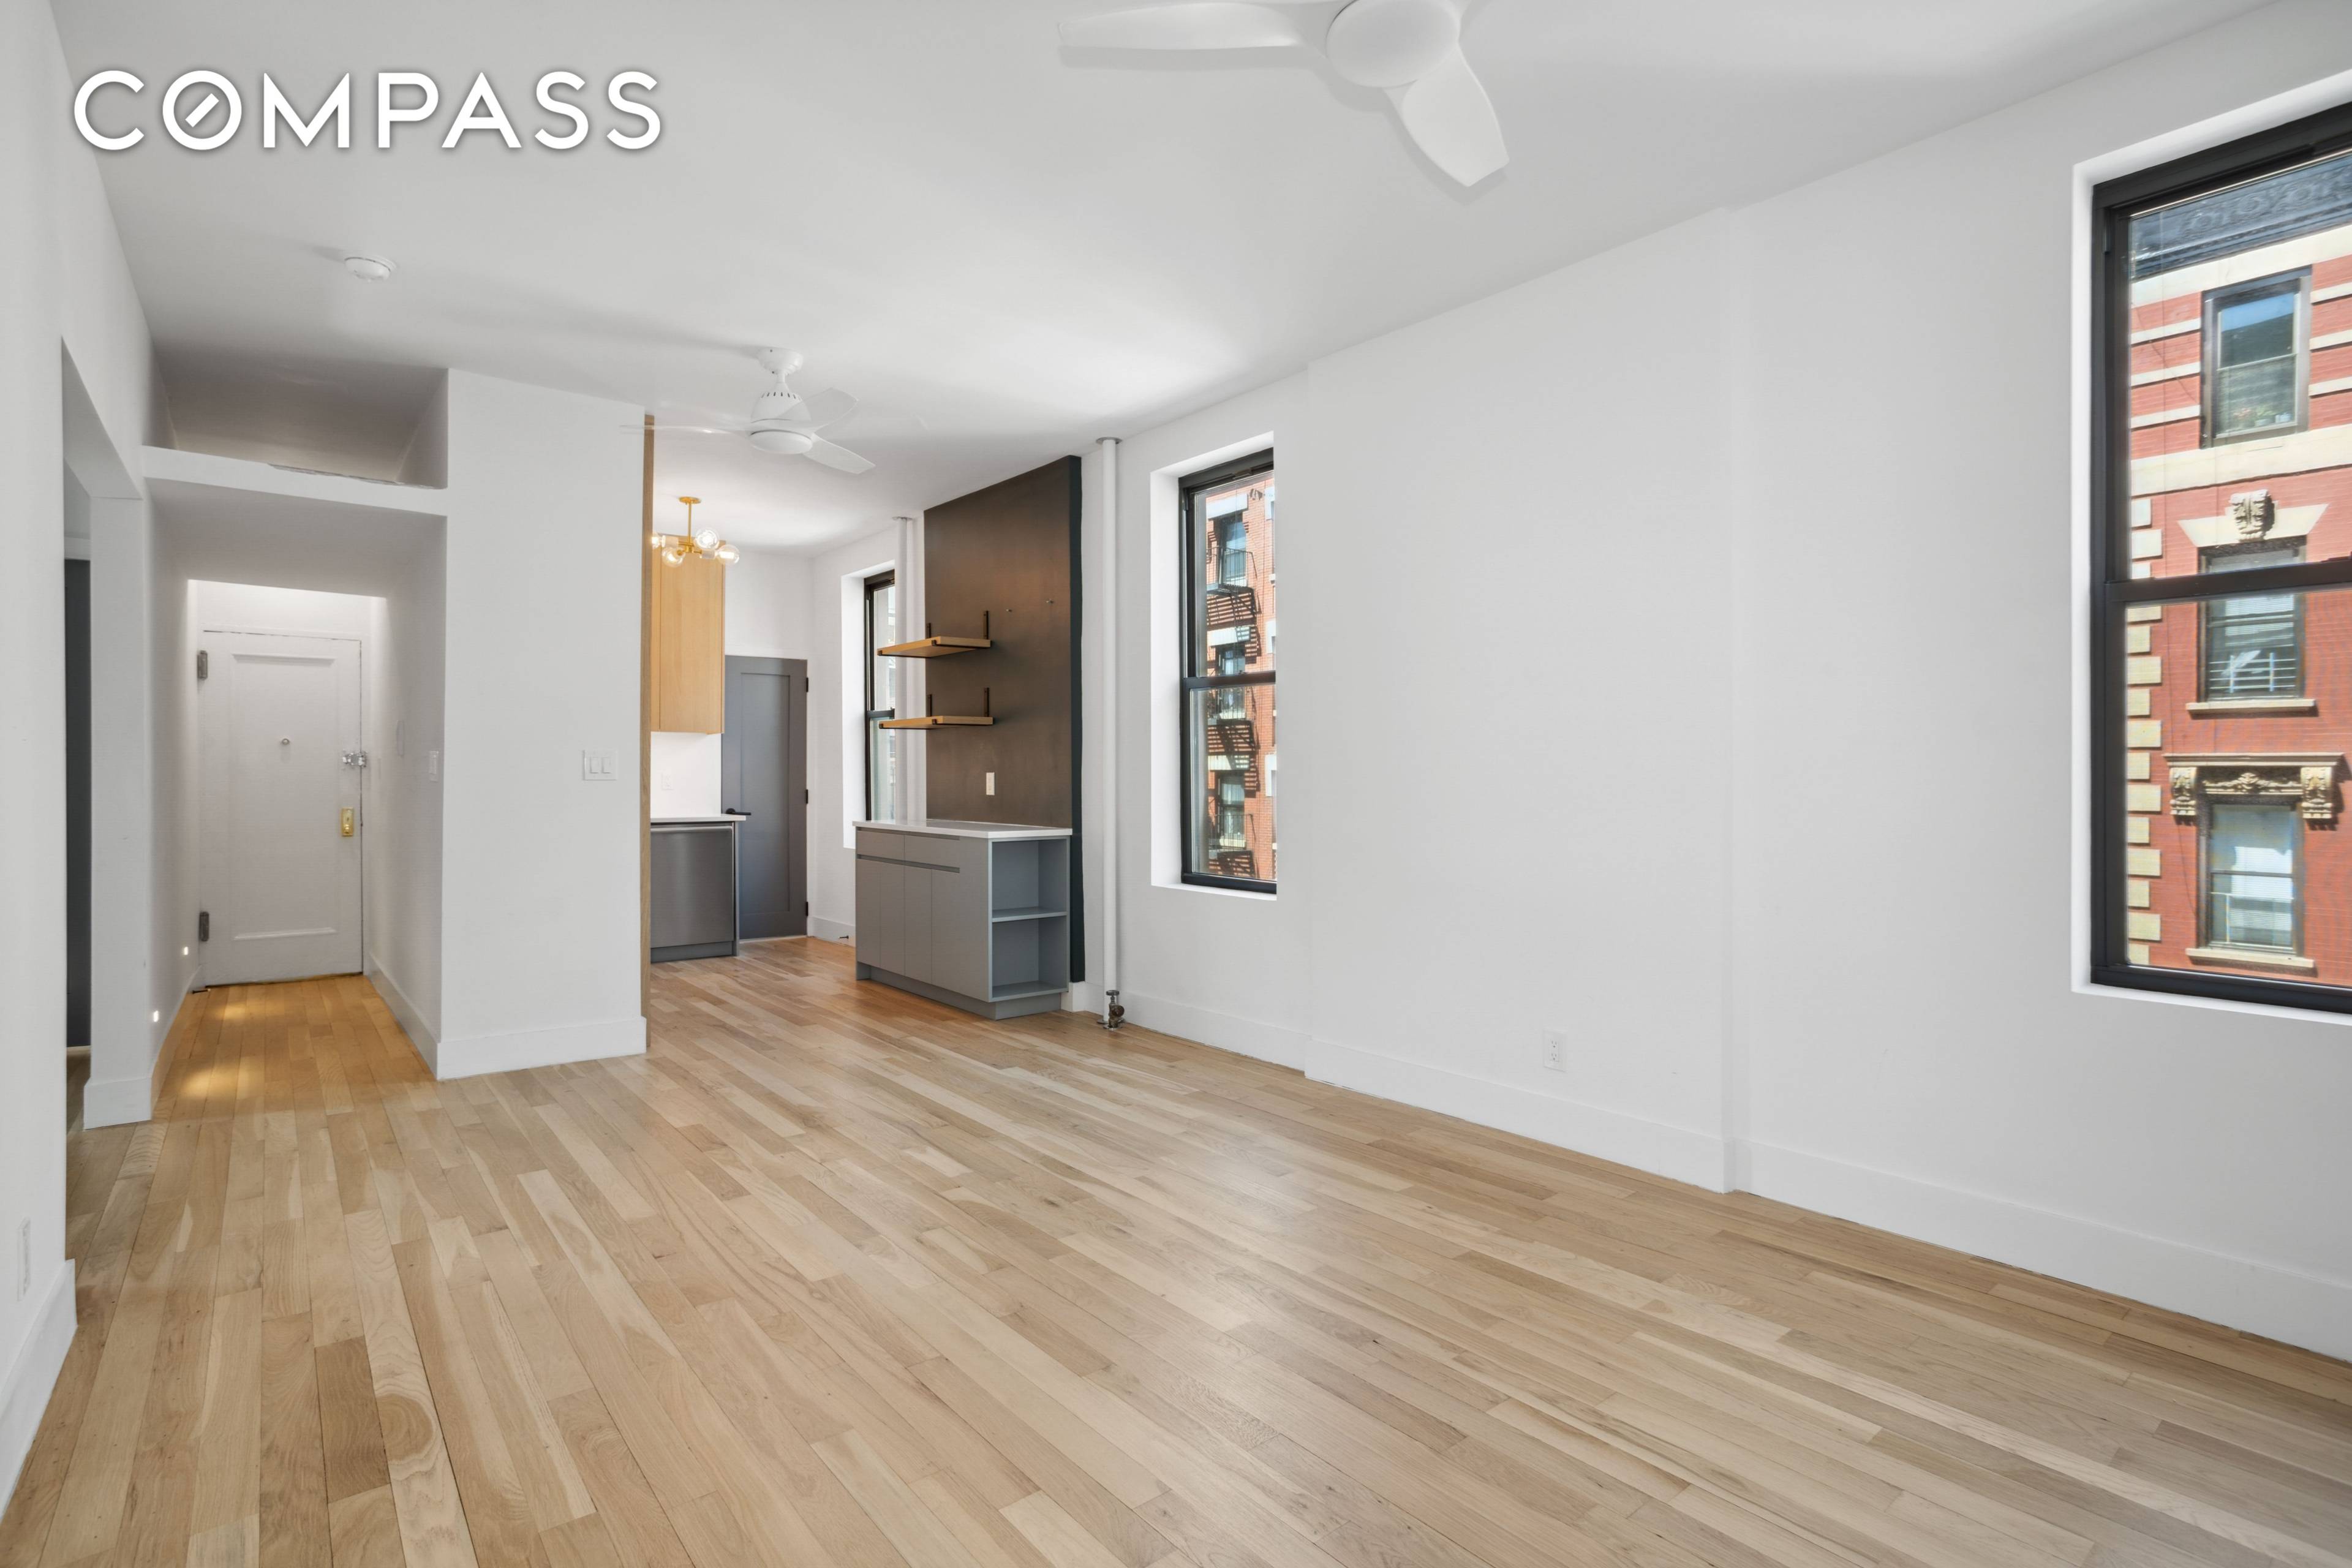 Situated in the heart of the Nolita, one of New York s most vibrant and exciting neighborhoods sits this beautiful 2 bedroom, 1.